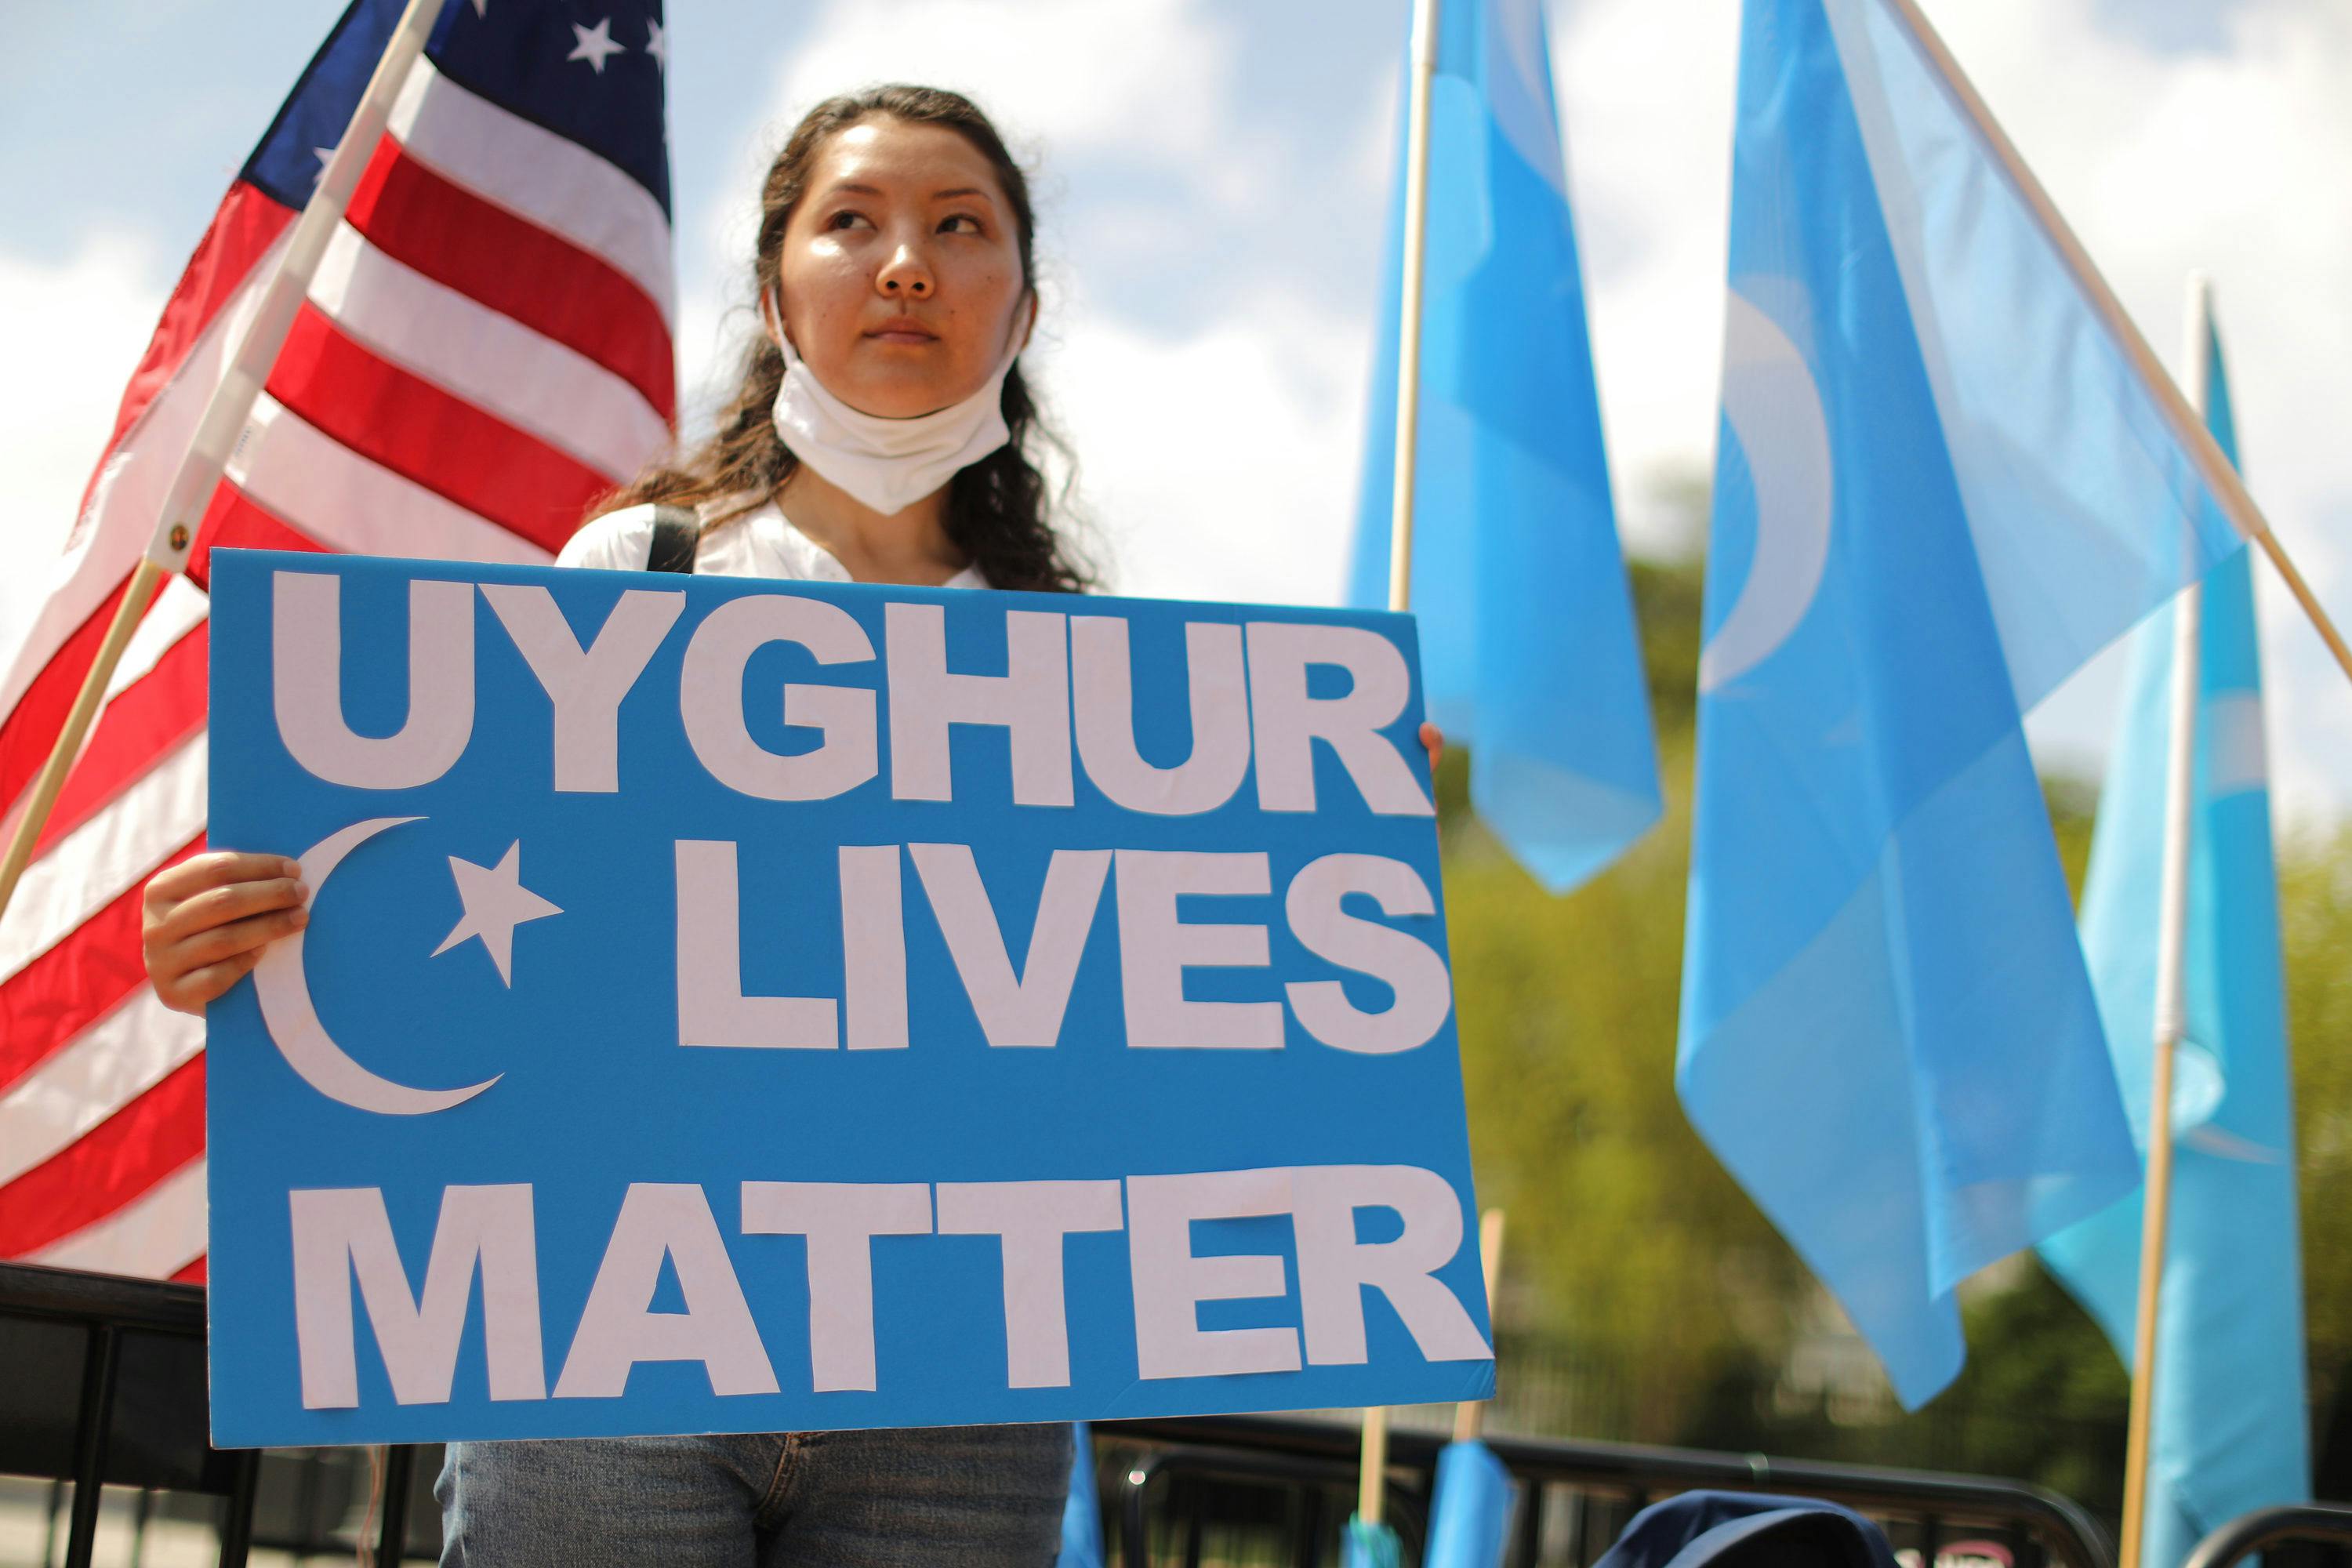 Western governments shed crocodile tears over Uyghur oppression in China